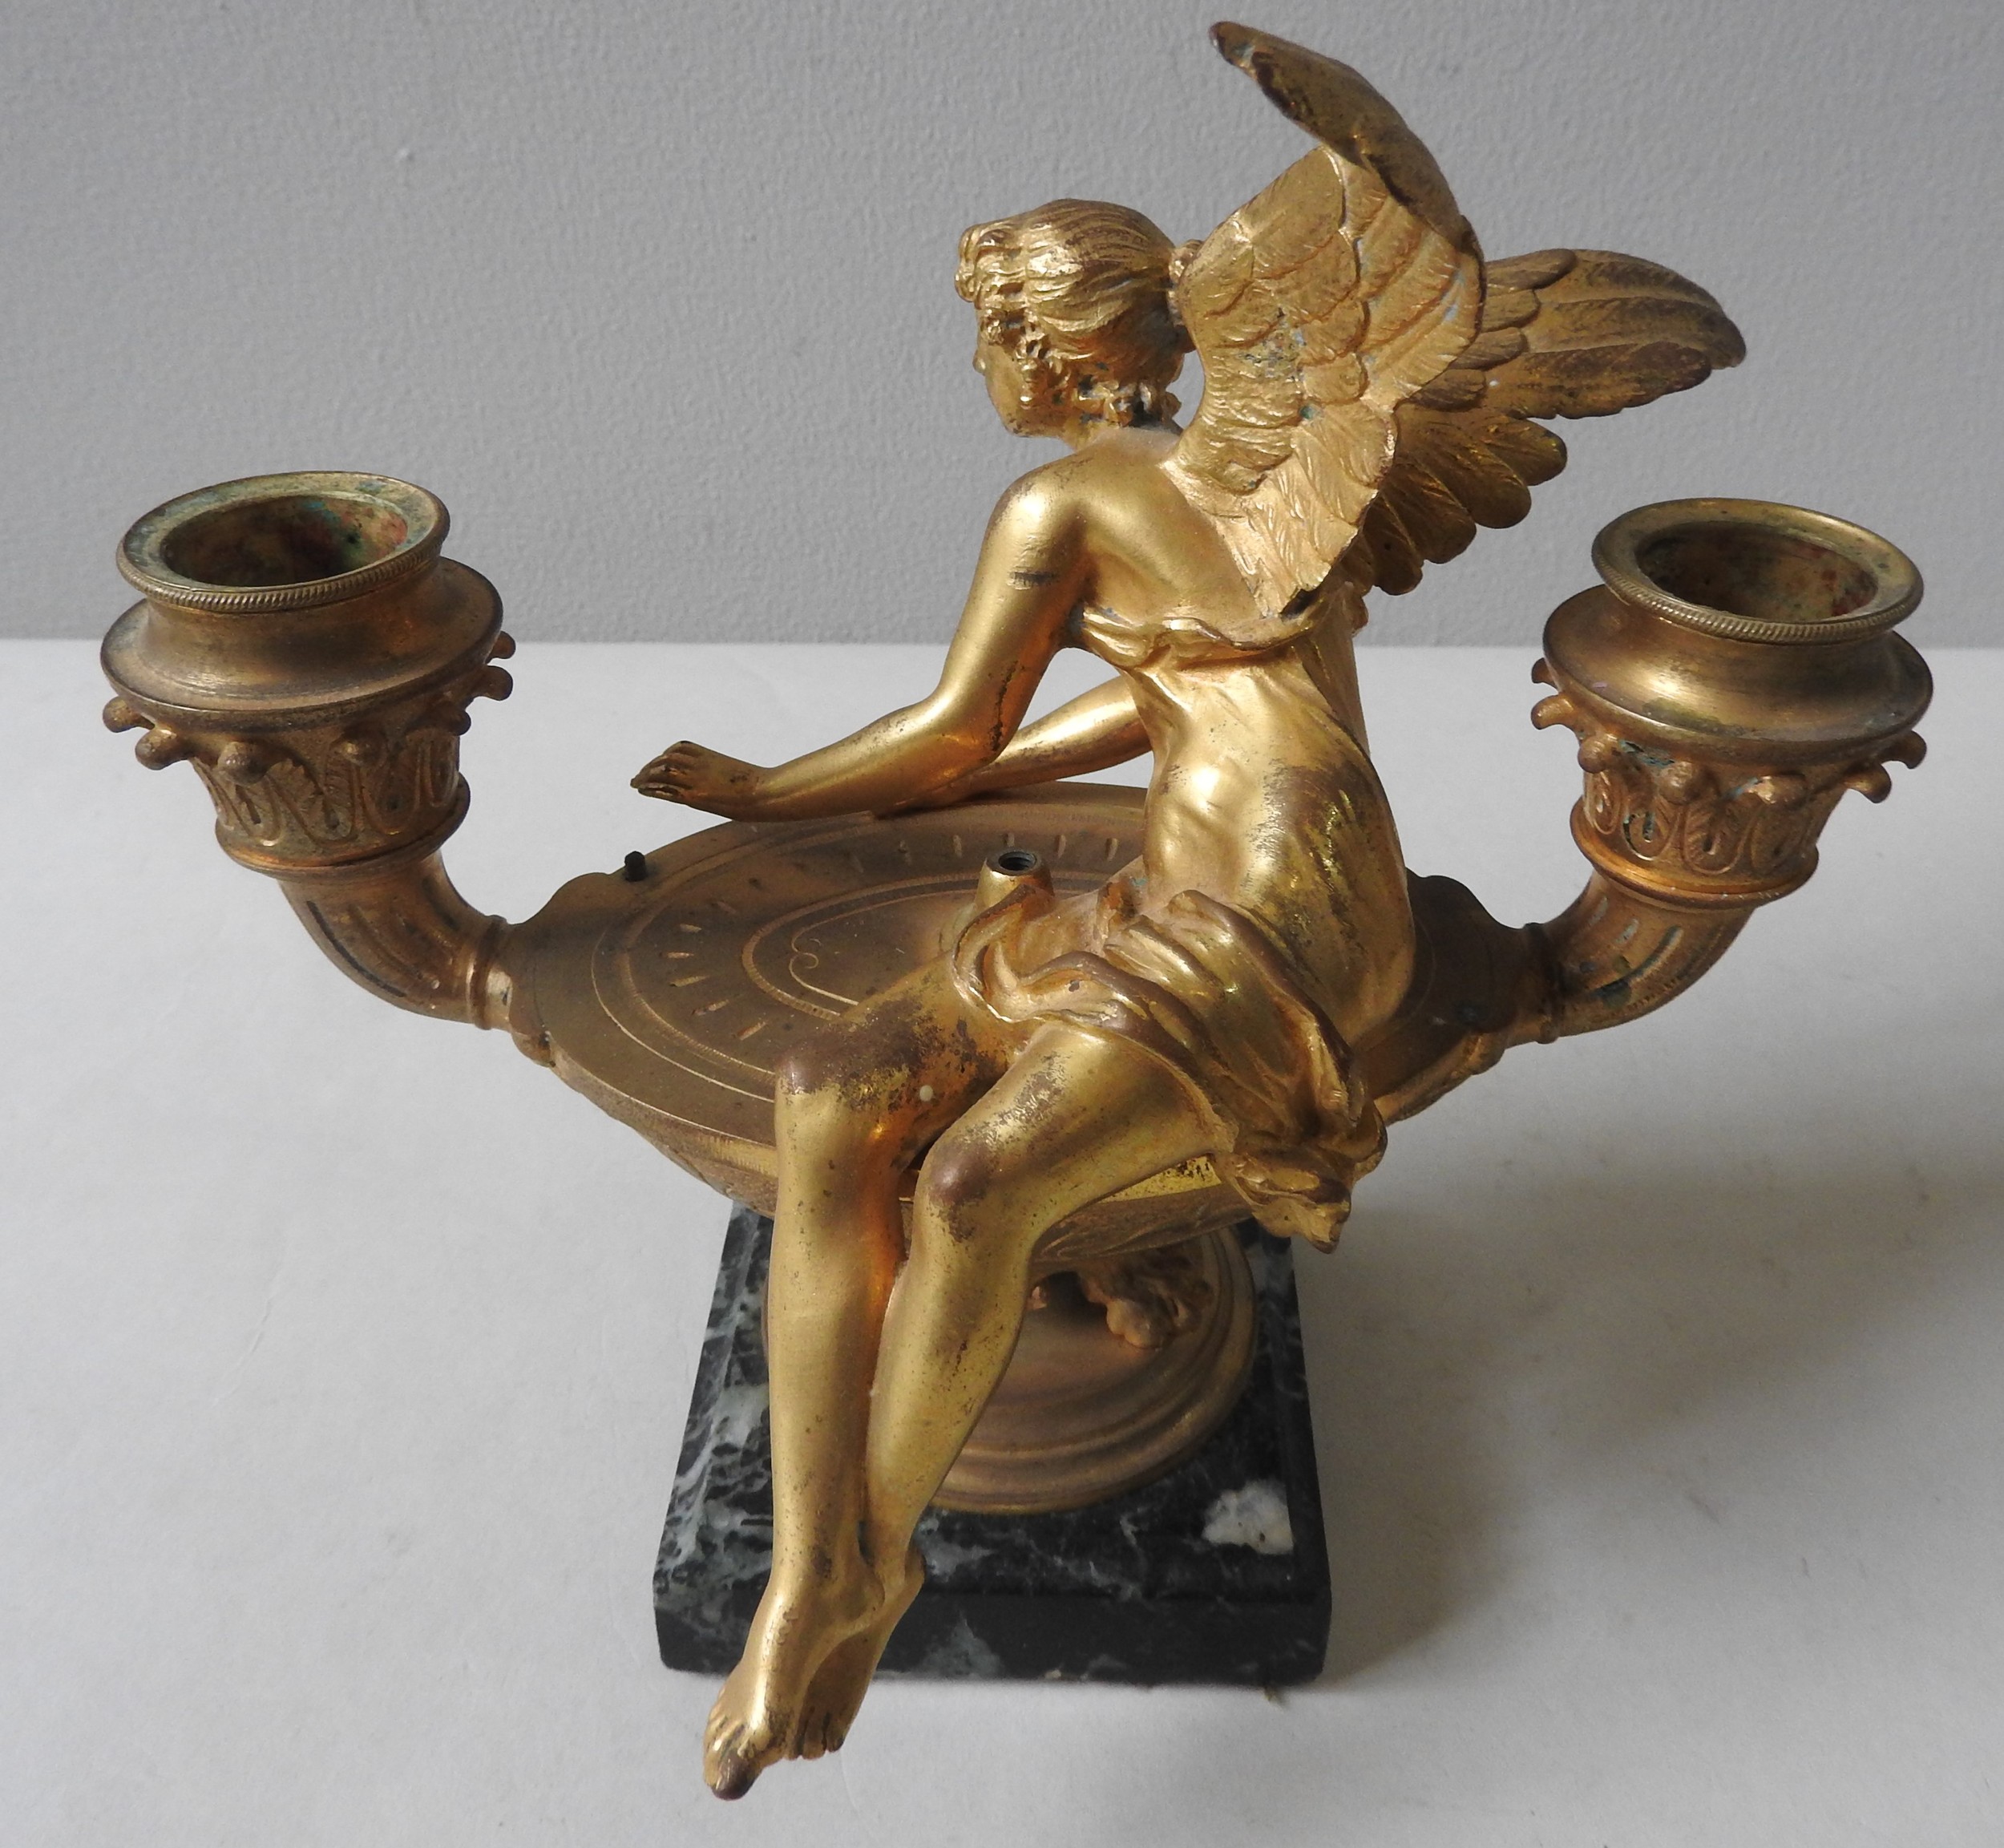 A GILT BRONZE CANDLE HOLDER, 19TH CENTURY, in the form of a classical oval shaped urn flanked by